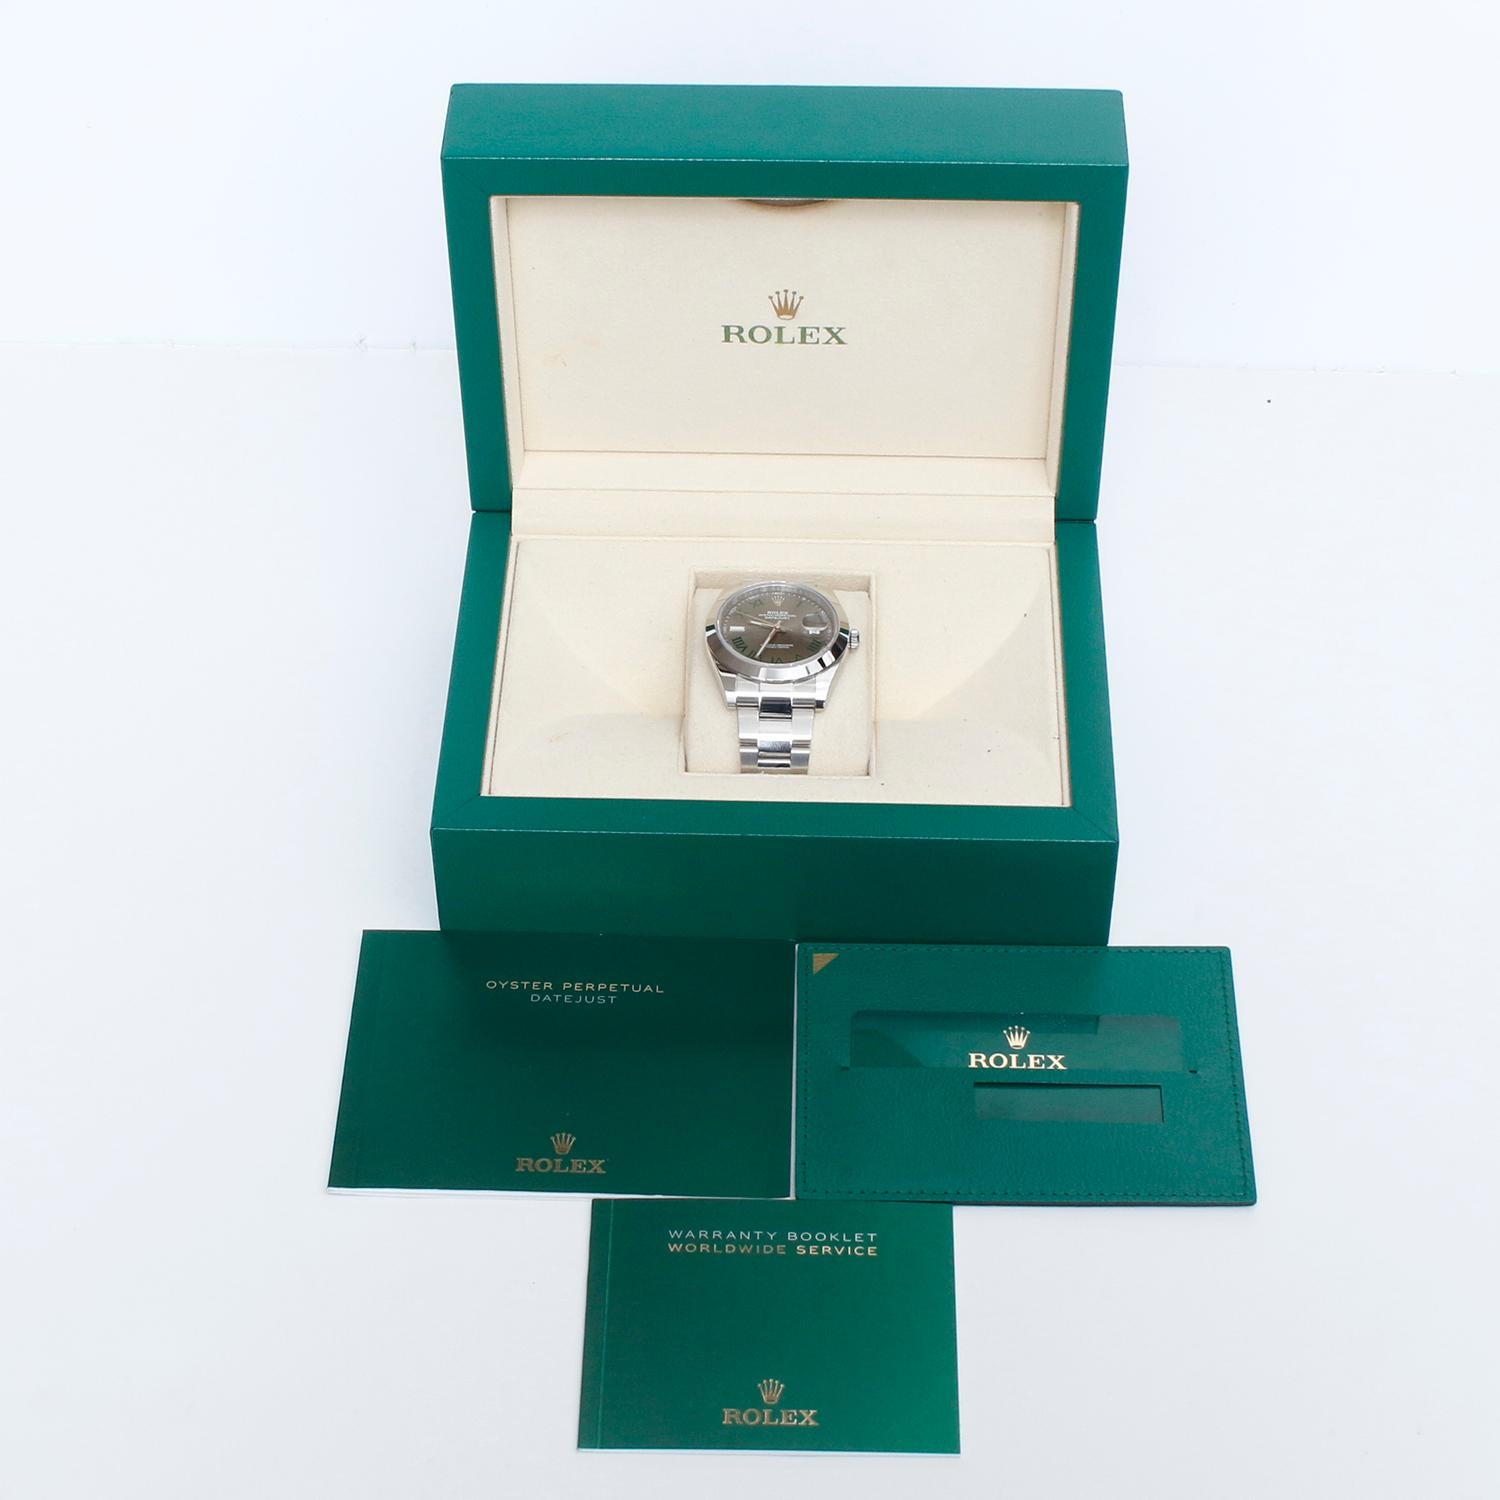 Rolex Datejust II Men's 41mm Stainless Steel 126300 Wimbledon Dial - Automatic winding, sapphire crystal. Stainless steel case (41mm diameter). Silver dial with Green Romans markers. Stainless steel Oyster bracelet. Pre-owned Rolex box and card.